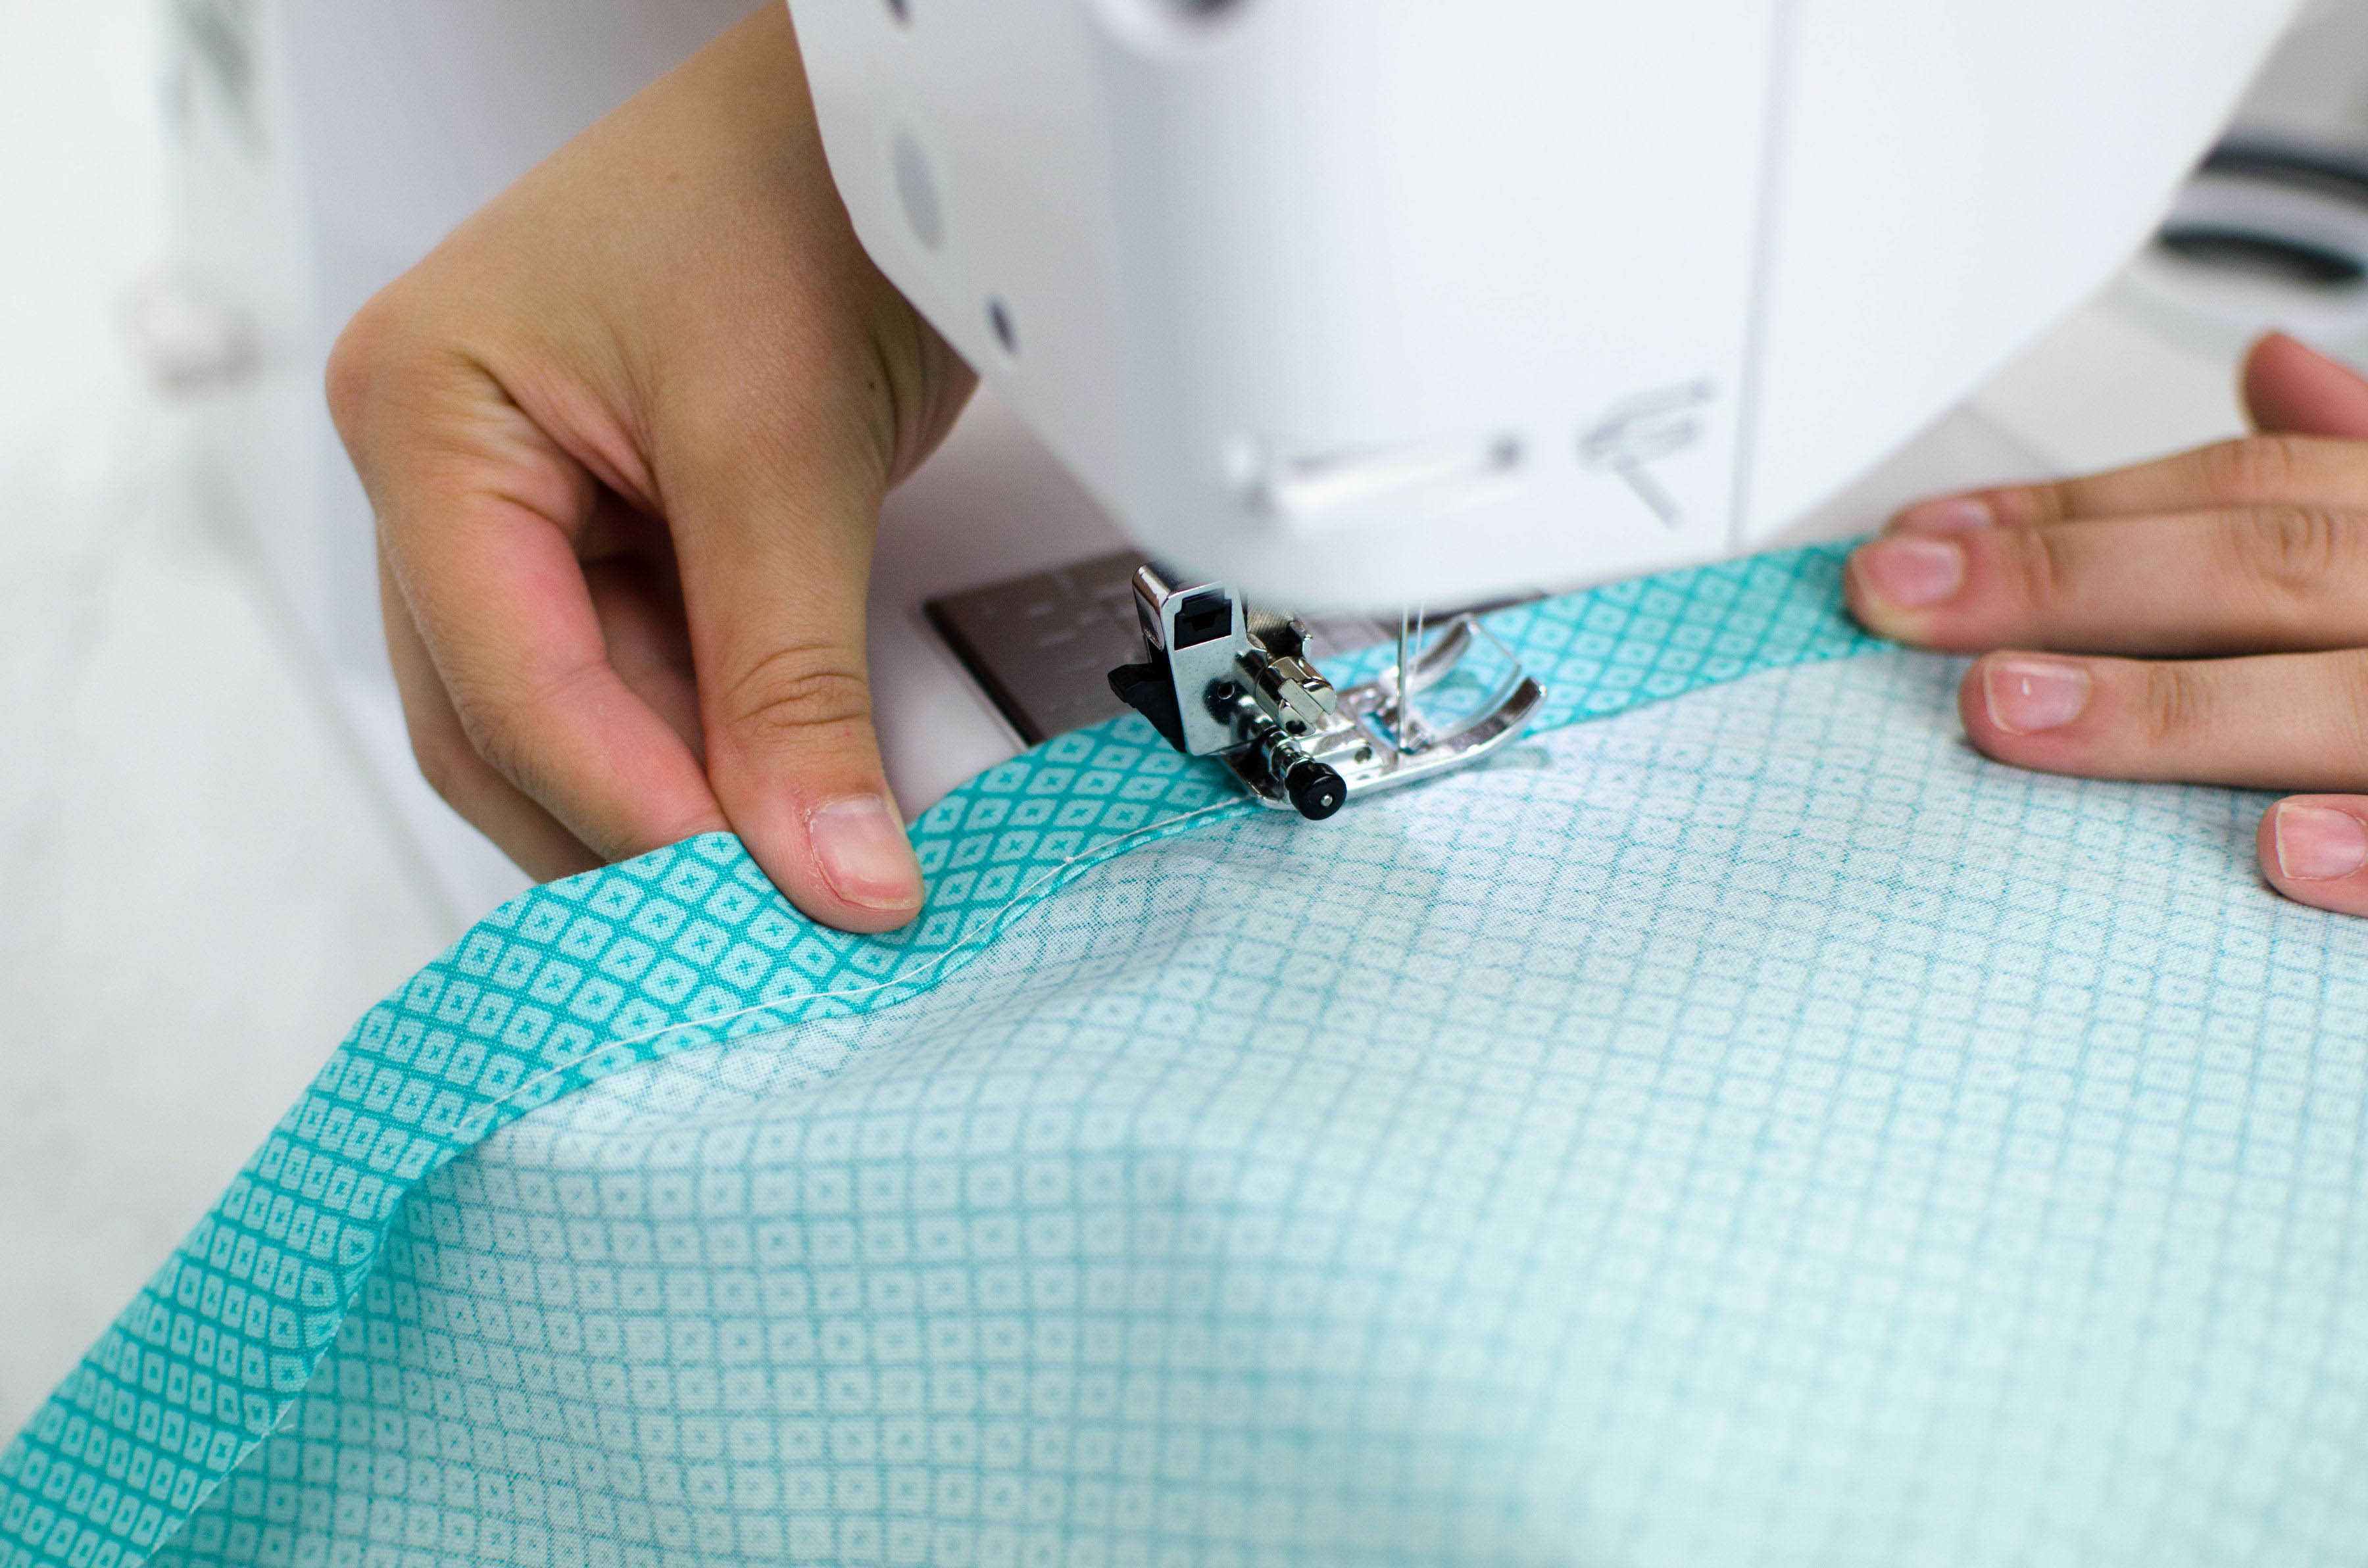 How To Sew Hem With Sewing Machine - www.inf-inet.com